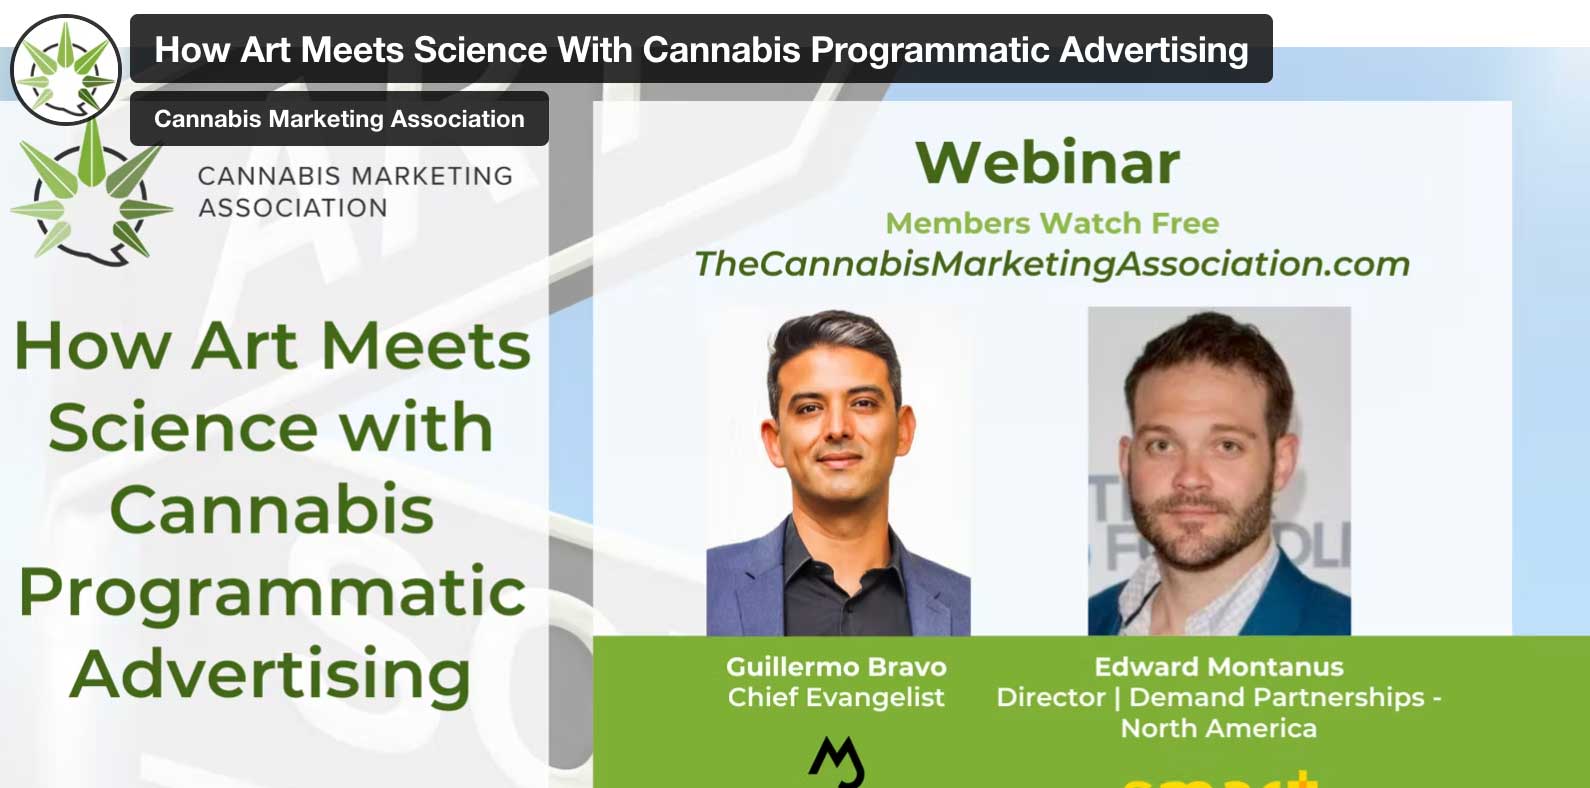 CMA: How Art Meets Science with Cannabis Programmatic Advertising